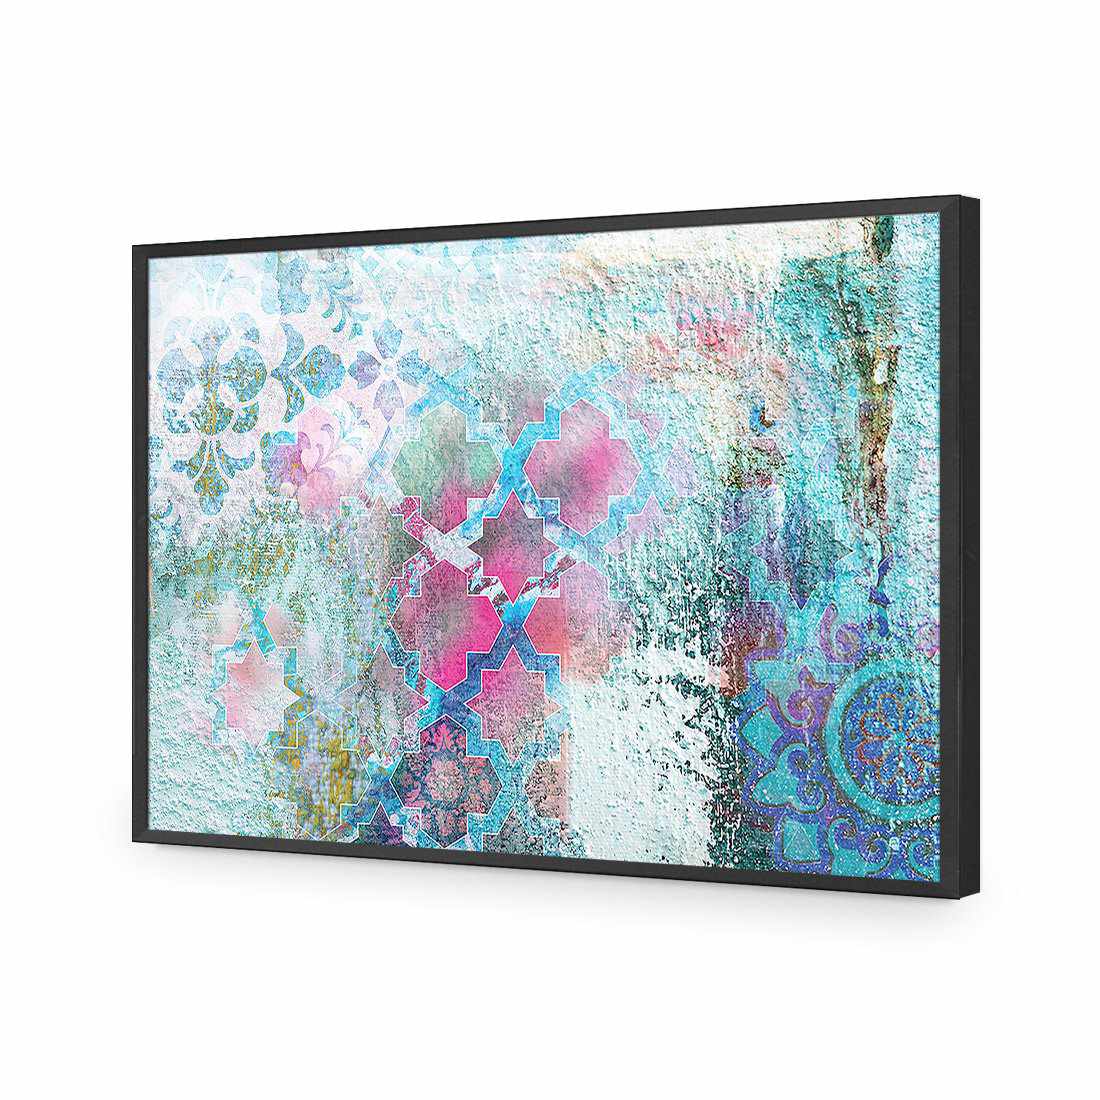 Moroccan Wall Pattern-Acrylic-Wall Art Design-Without Border-Acrylic - Black Frame-45x30cm-Wall Art Designs